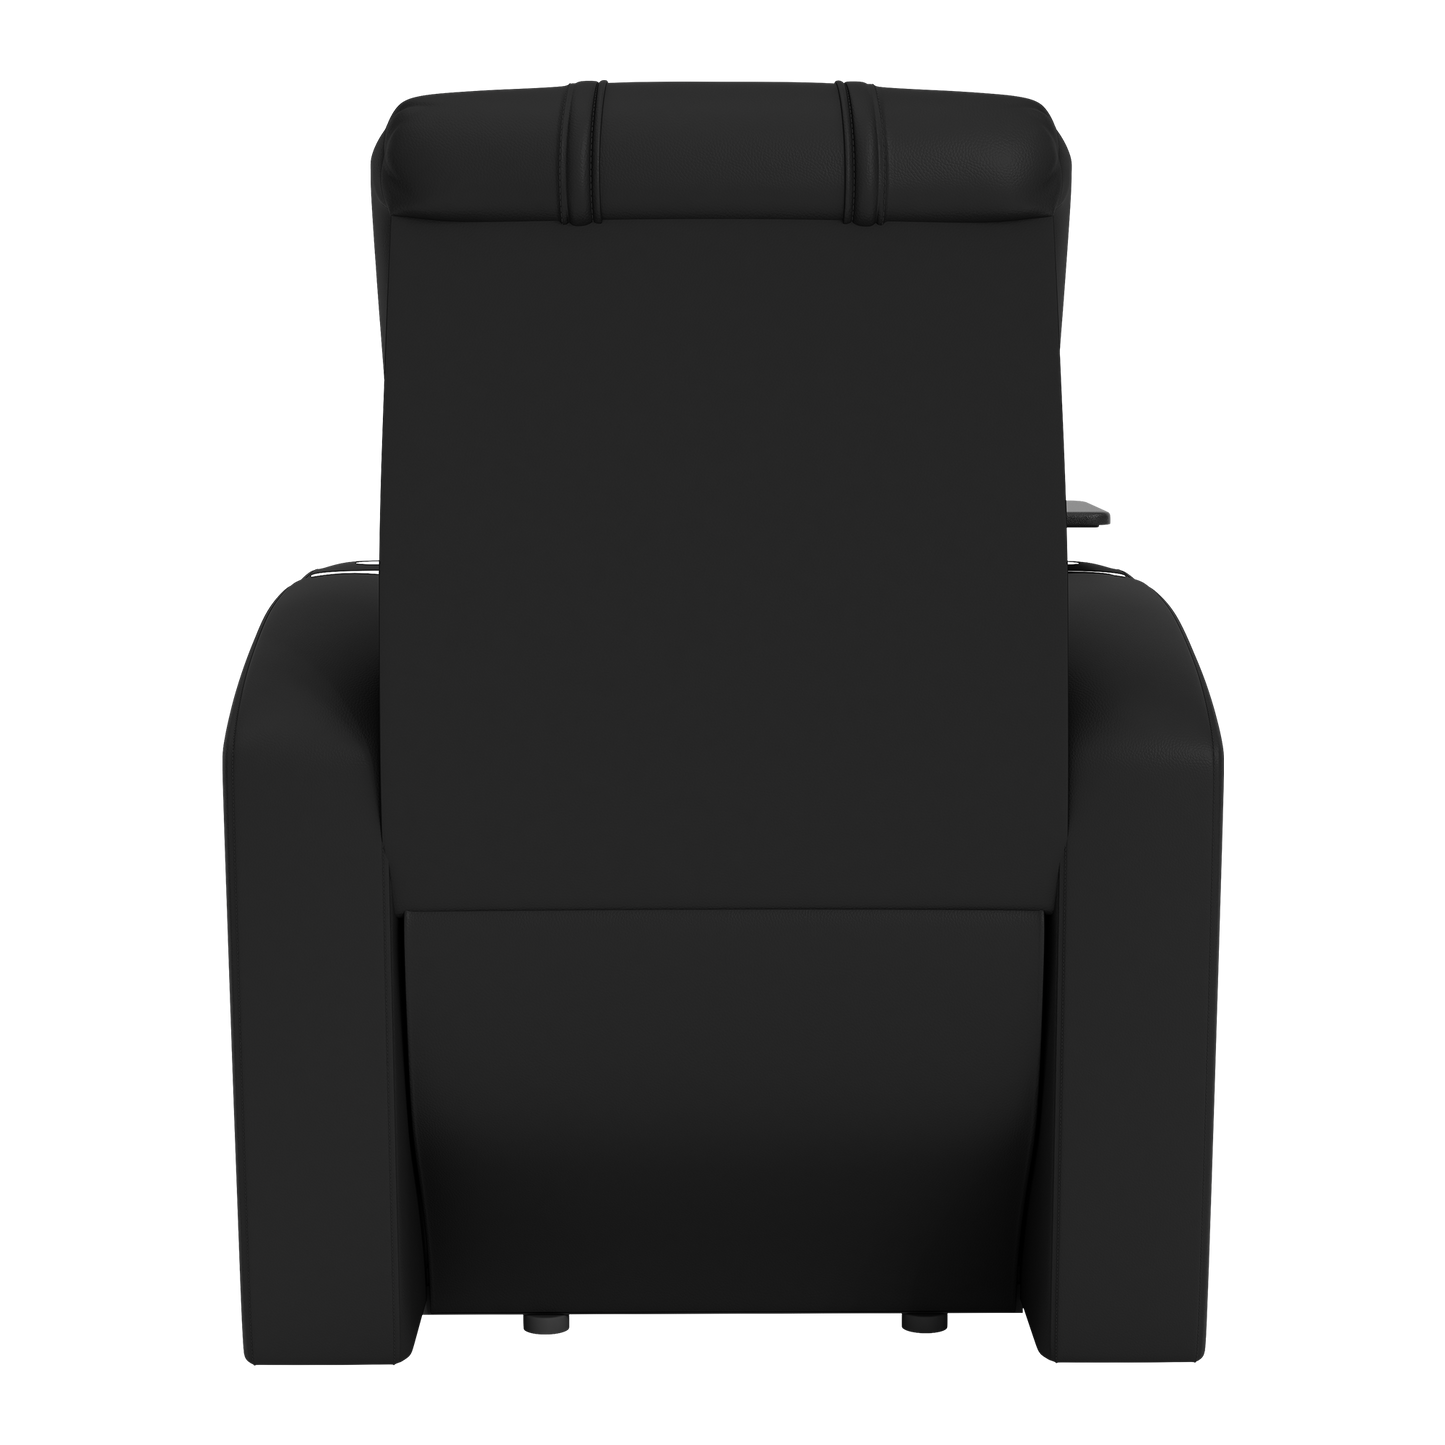 Stealth Power Plus Recliner with Chicago Bears Helmet Logo